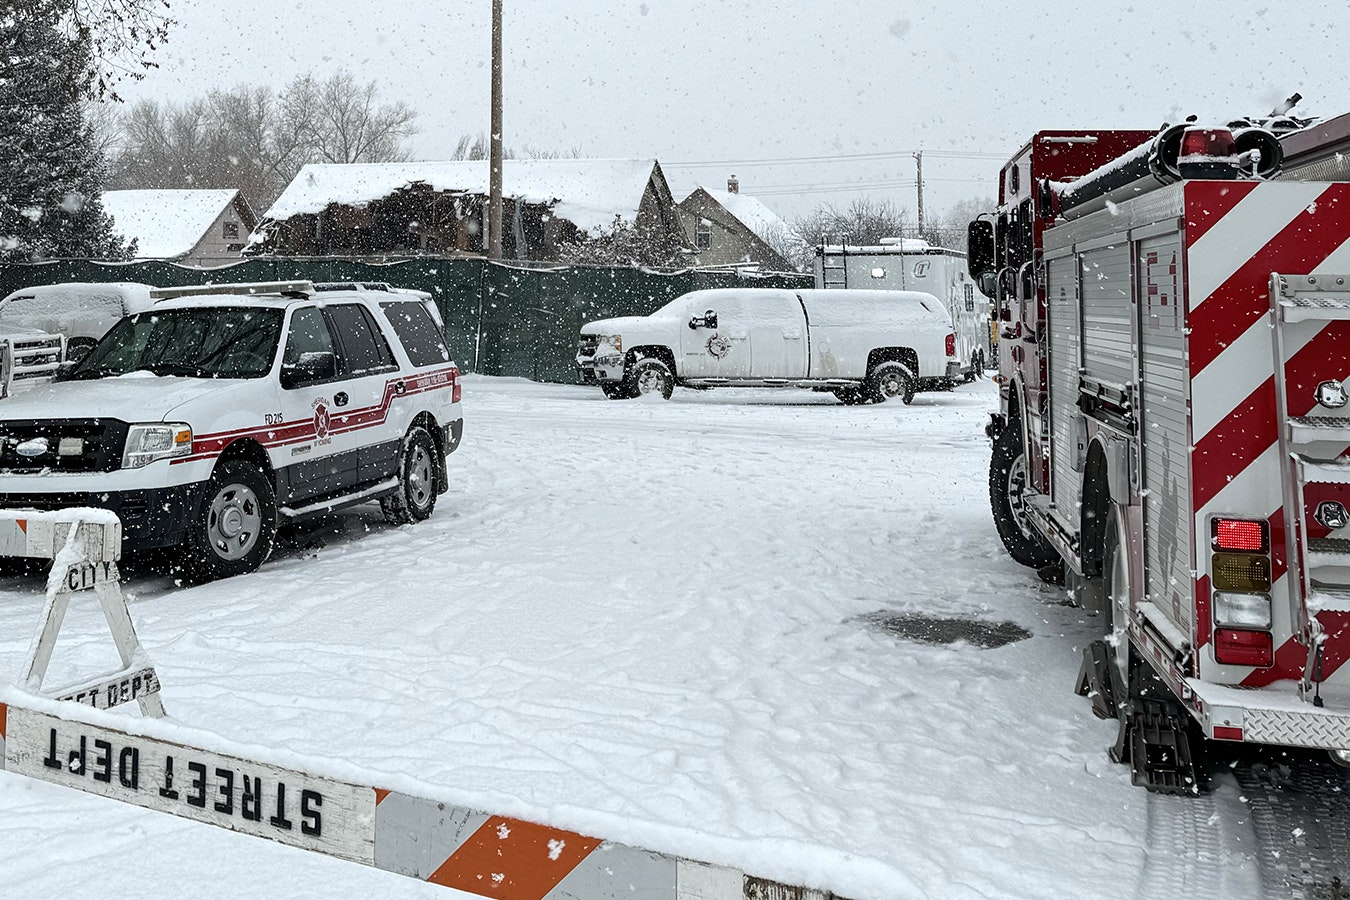 The house a man suspected of shooting and killing a Sheridan police officer Tuesday barricaded himself in for more than 30 hours was torn open in several places during the standoff as law enforcement tried to get him out.